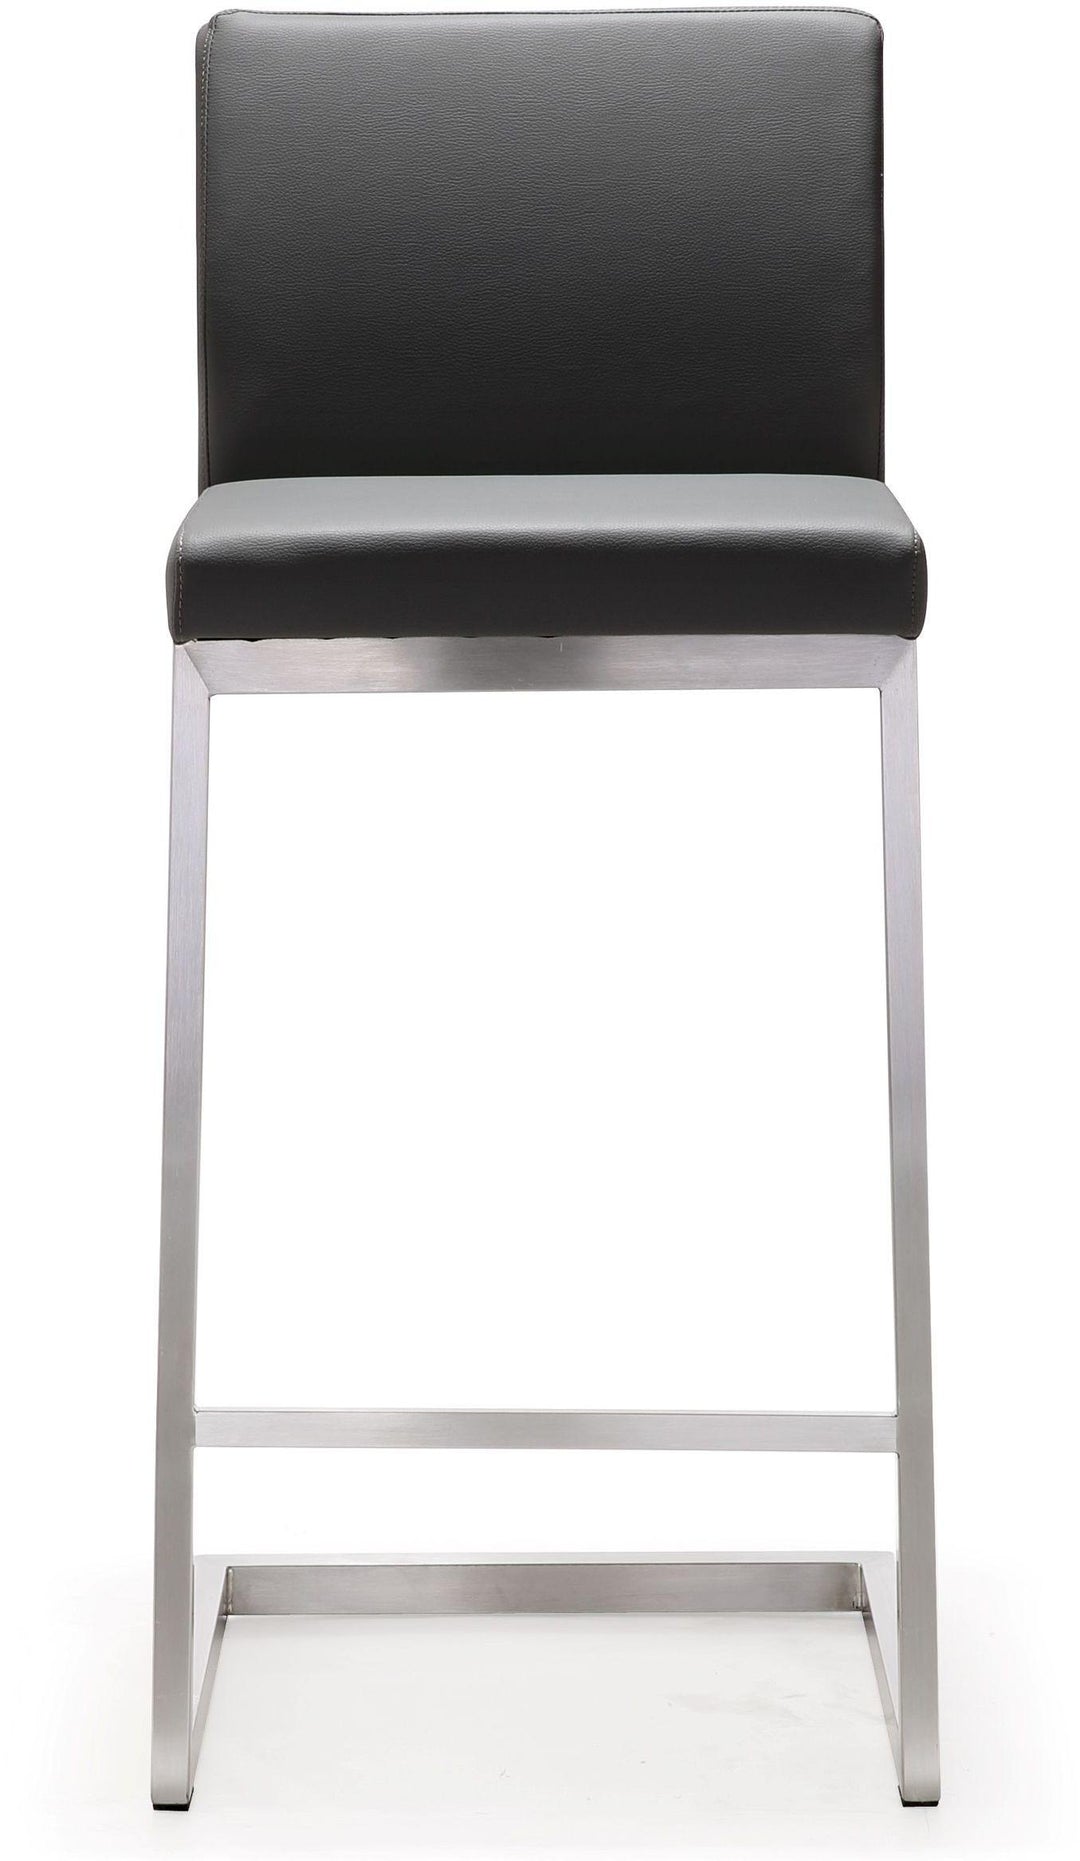 American Home Furniture | TOV Furniture - Parma Grey Stainless Steel Counter Stool - Set of 2